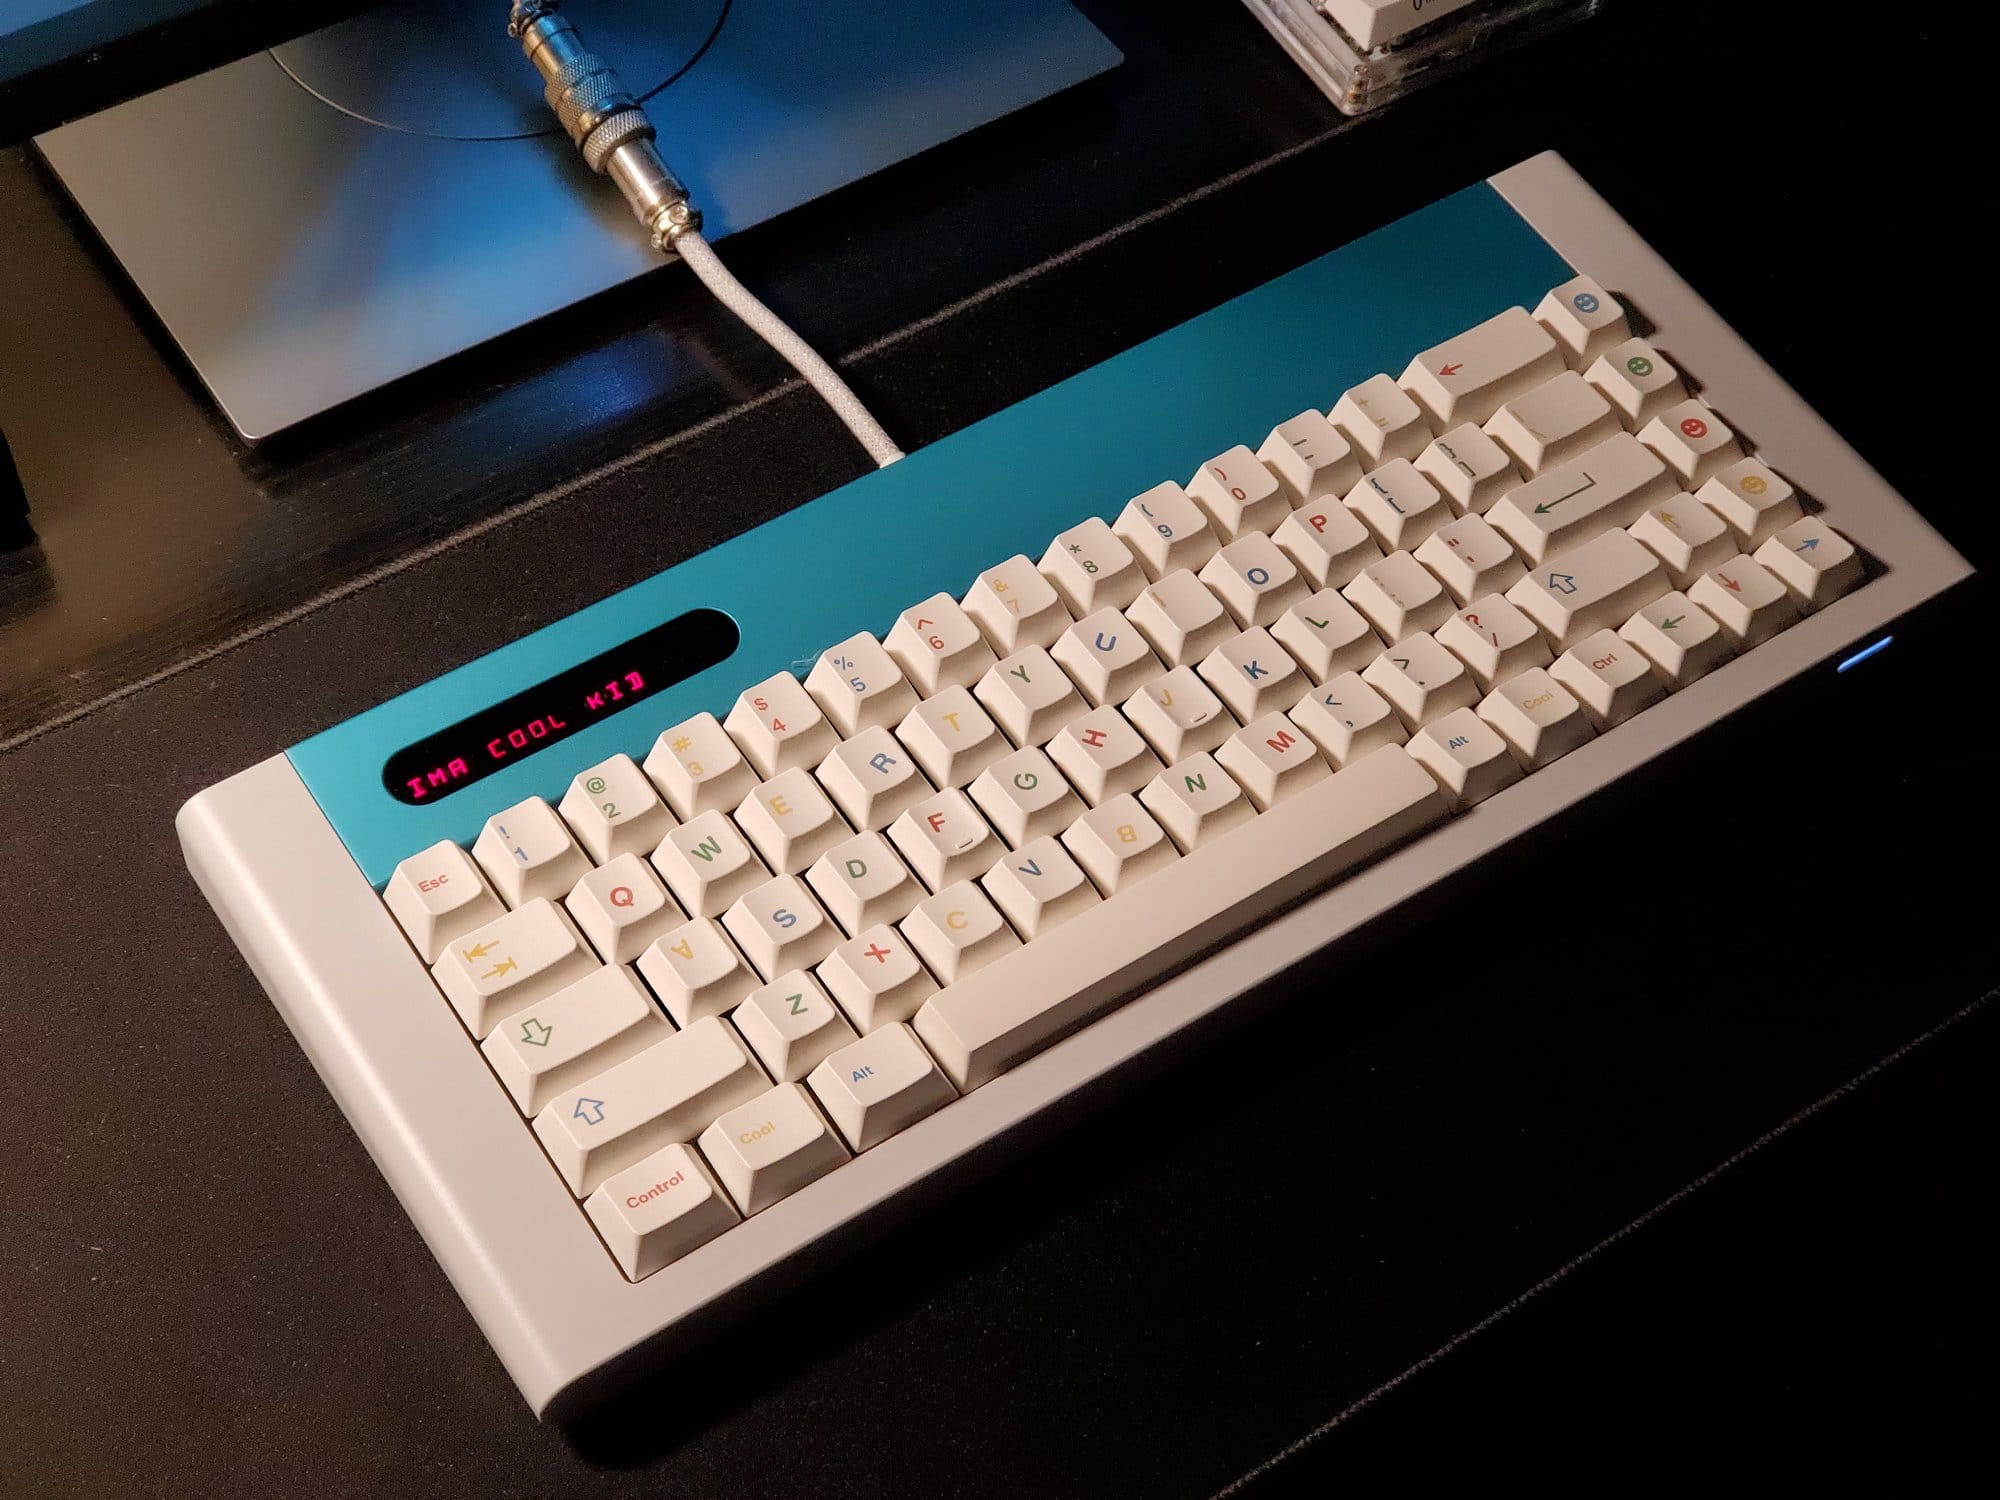 A close-up of a custom mechanical keyboard with white and pastel-coloured keycaps on a dark desk surface